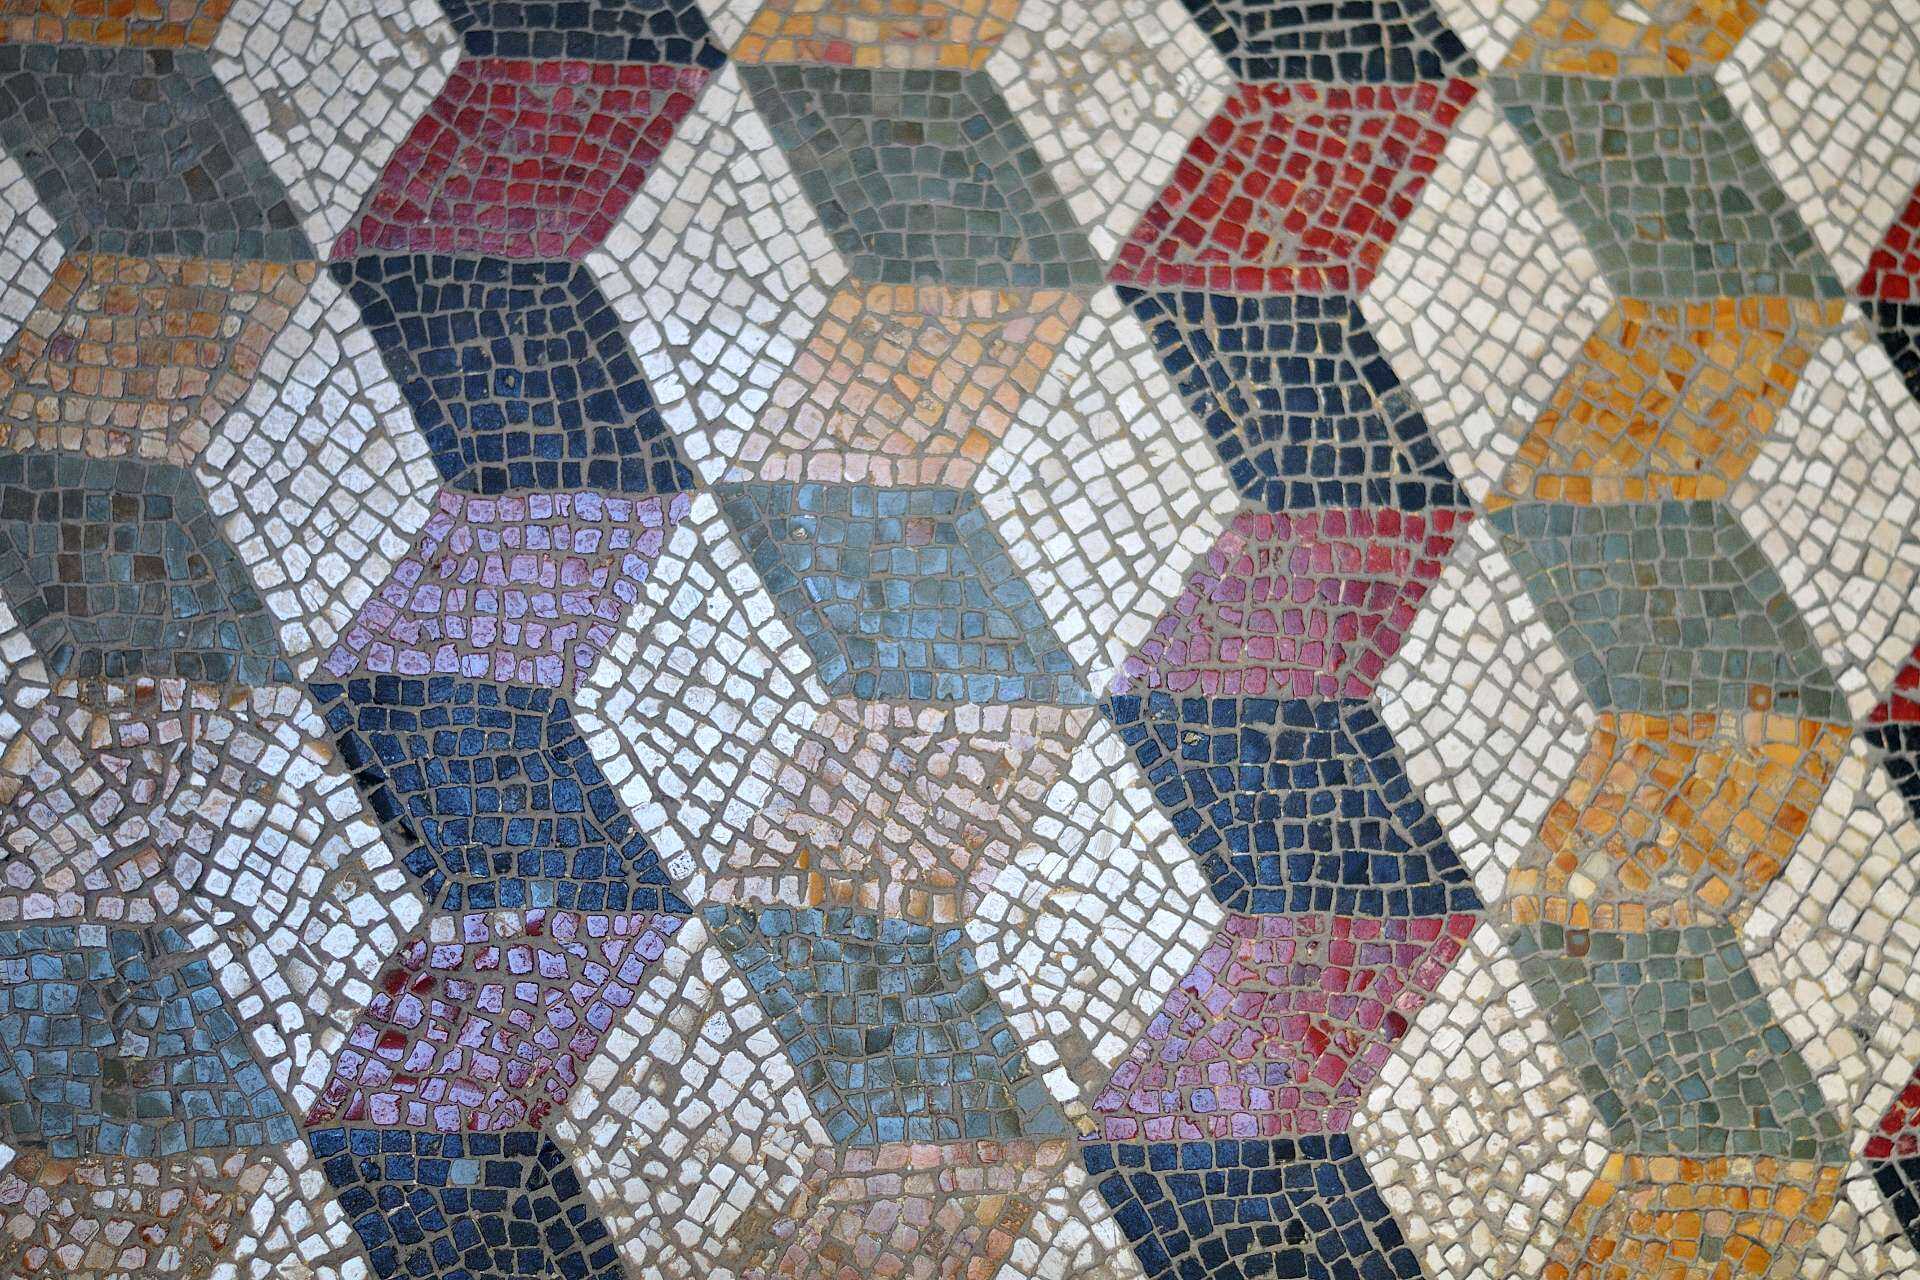 Antique Roman mosaic tiles in blue, green, red and yellow